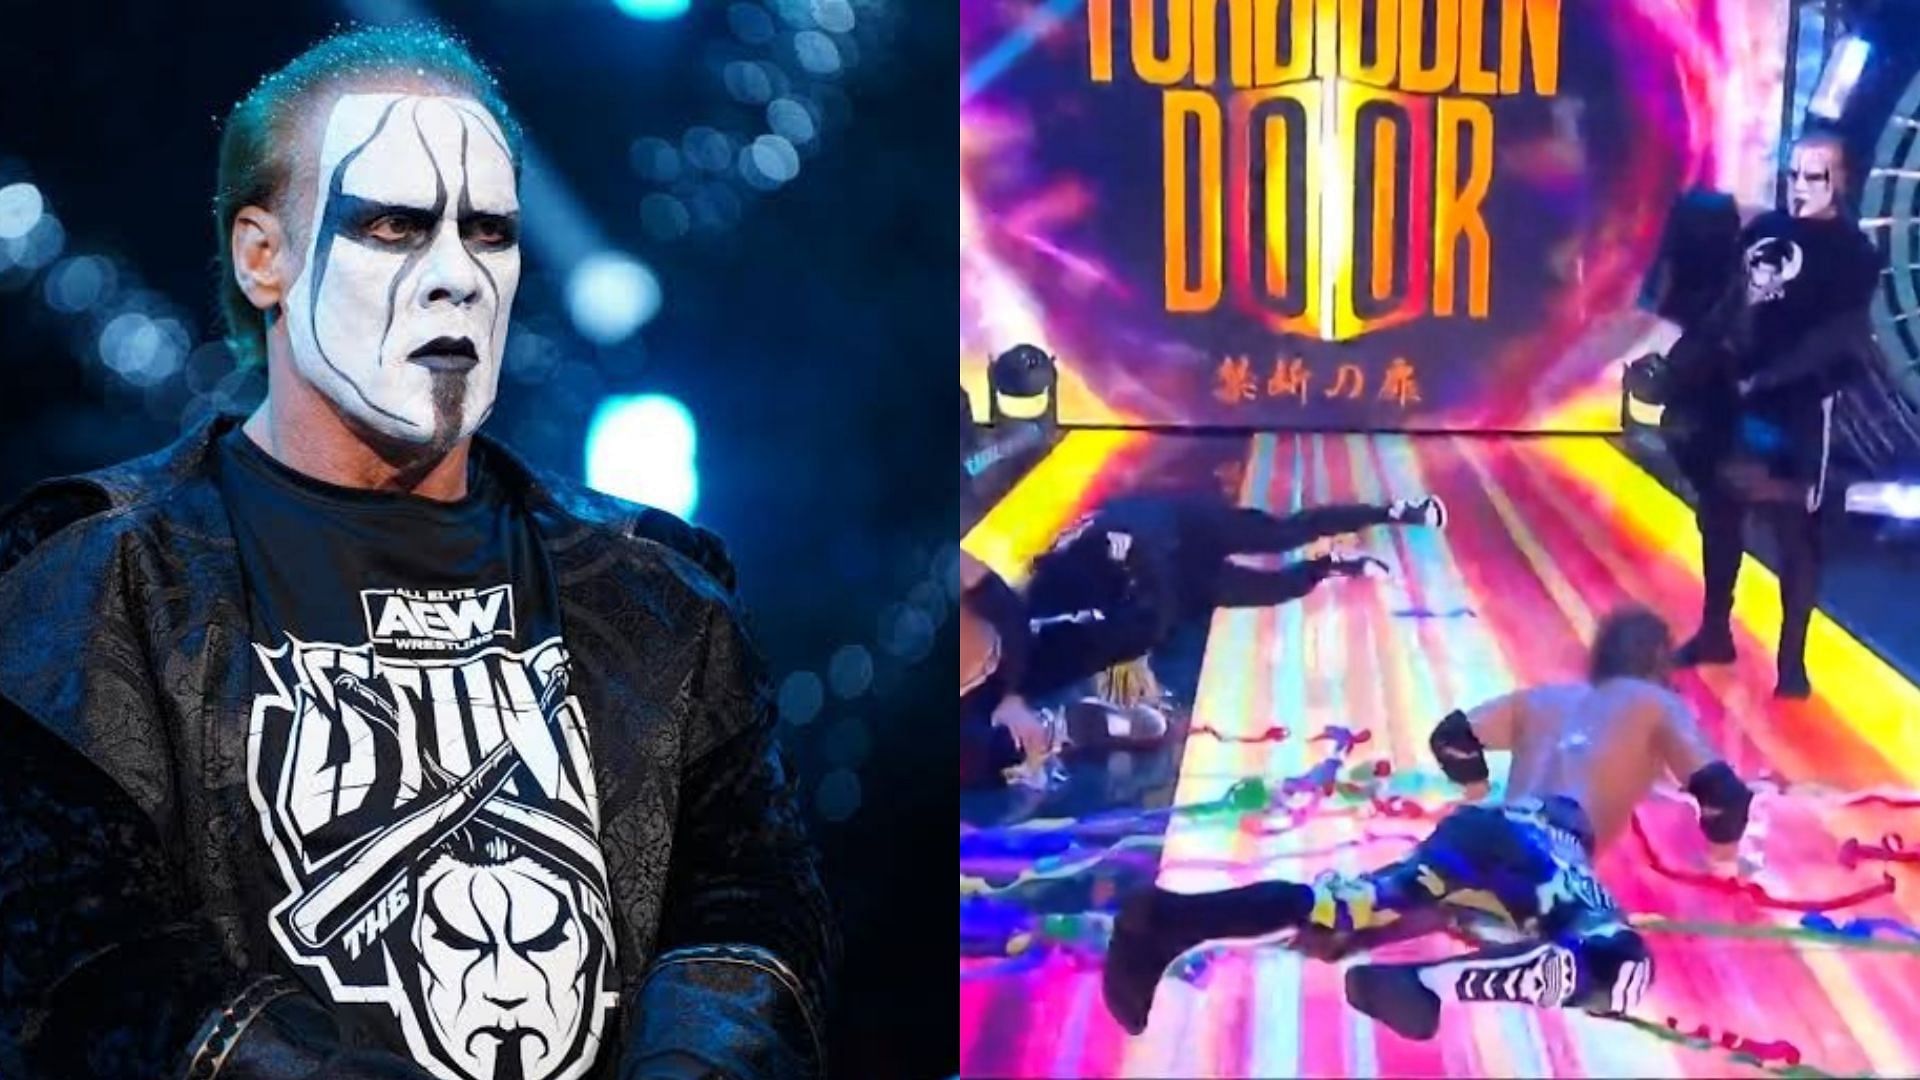 Sting teamed up with Darby Allin and Sting at Forbidden Door